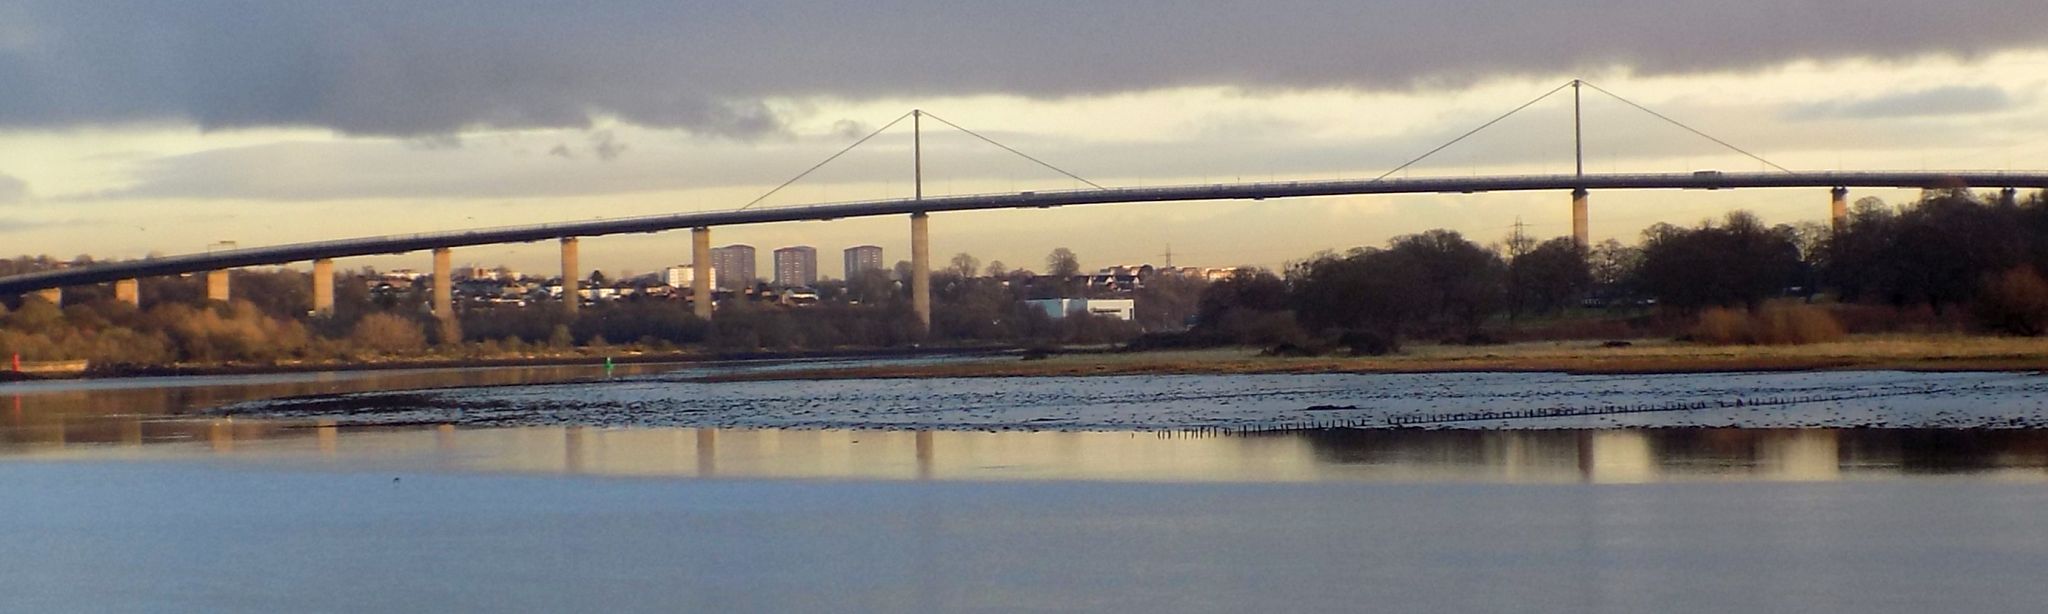 Erskine Bridge across River Clyde from Bowling